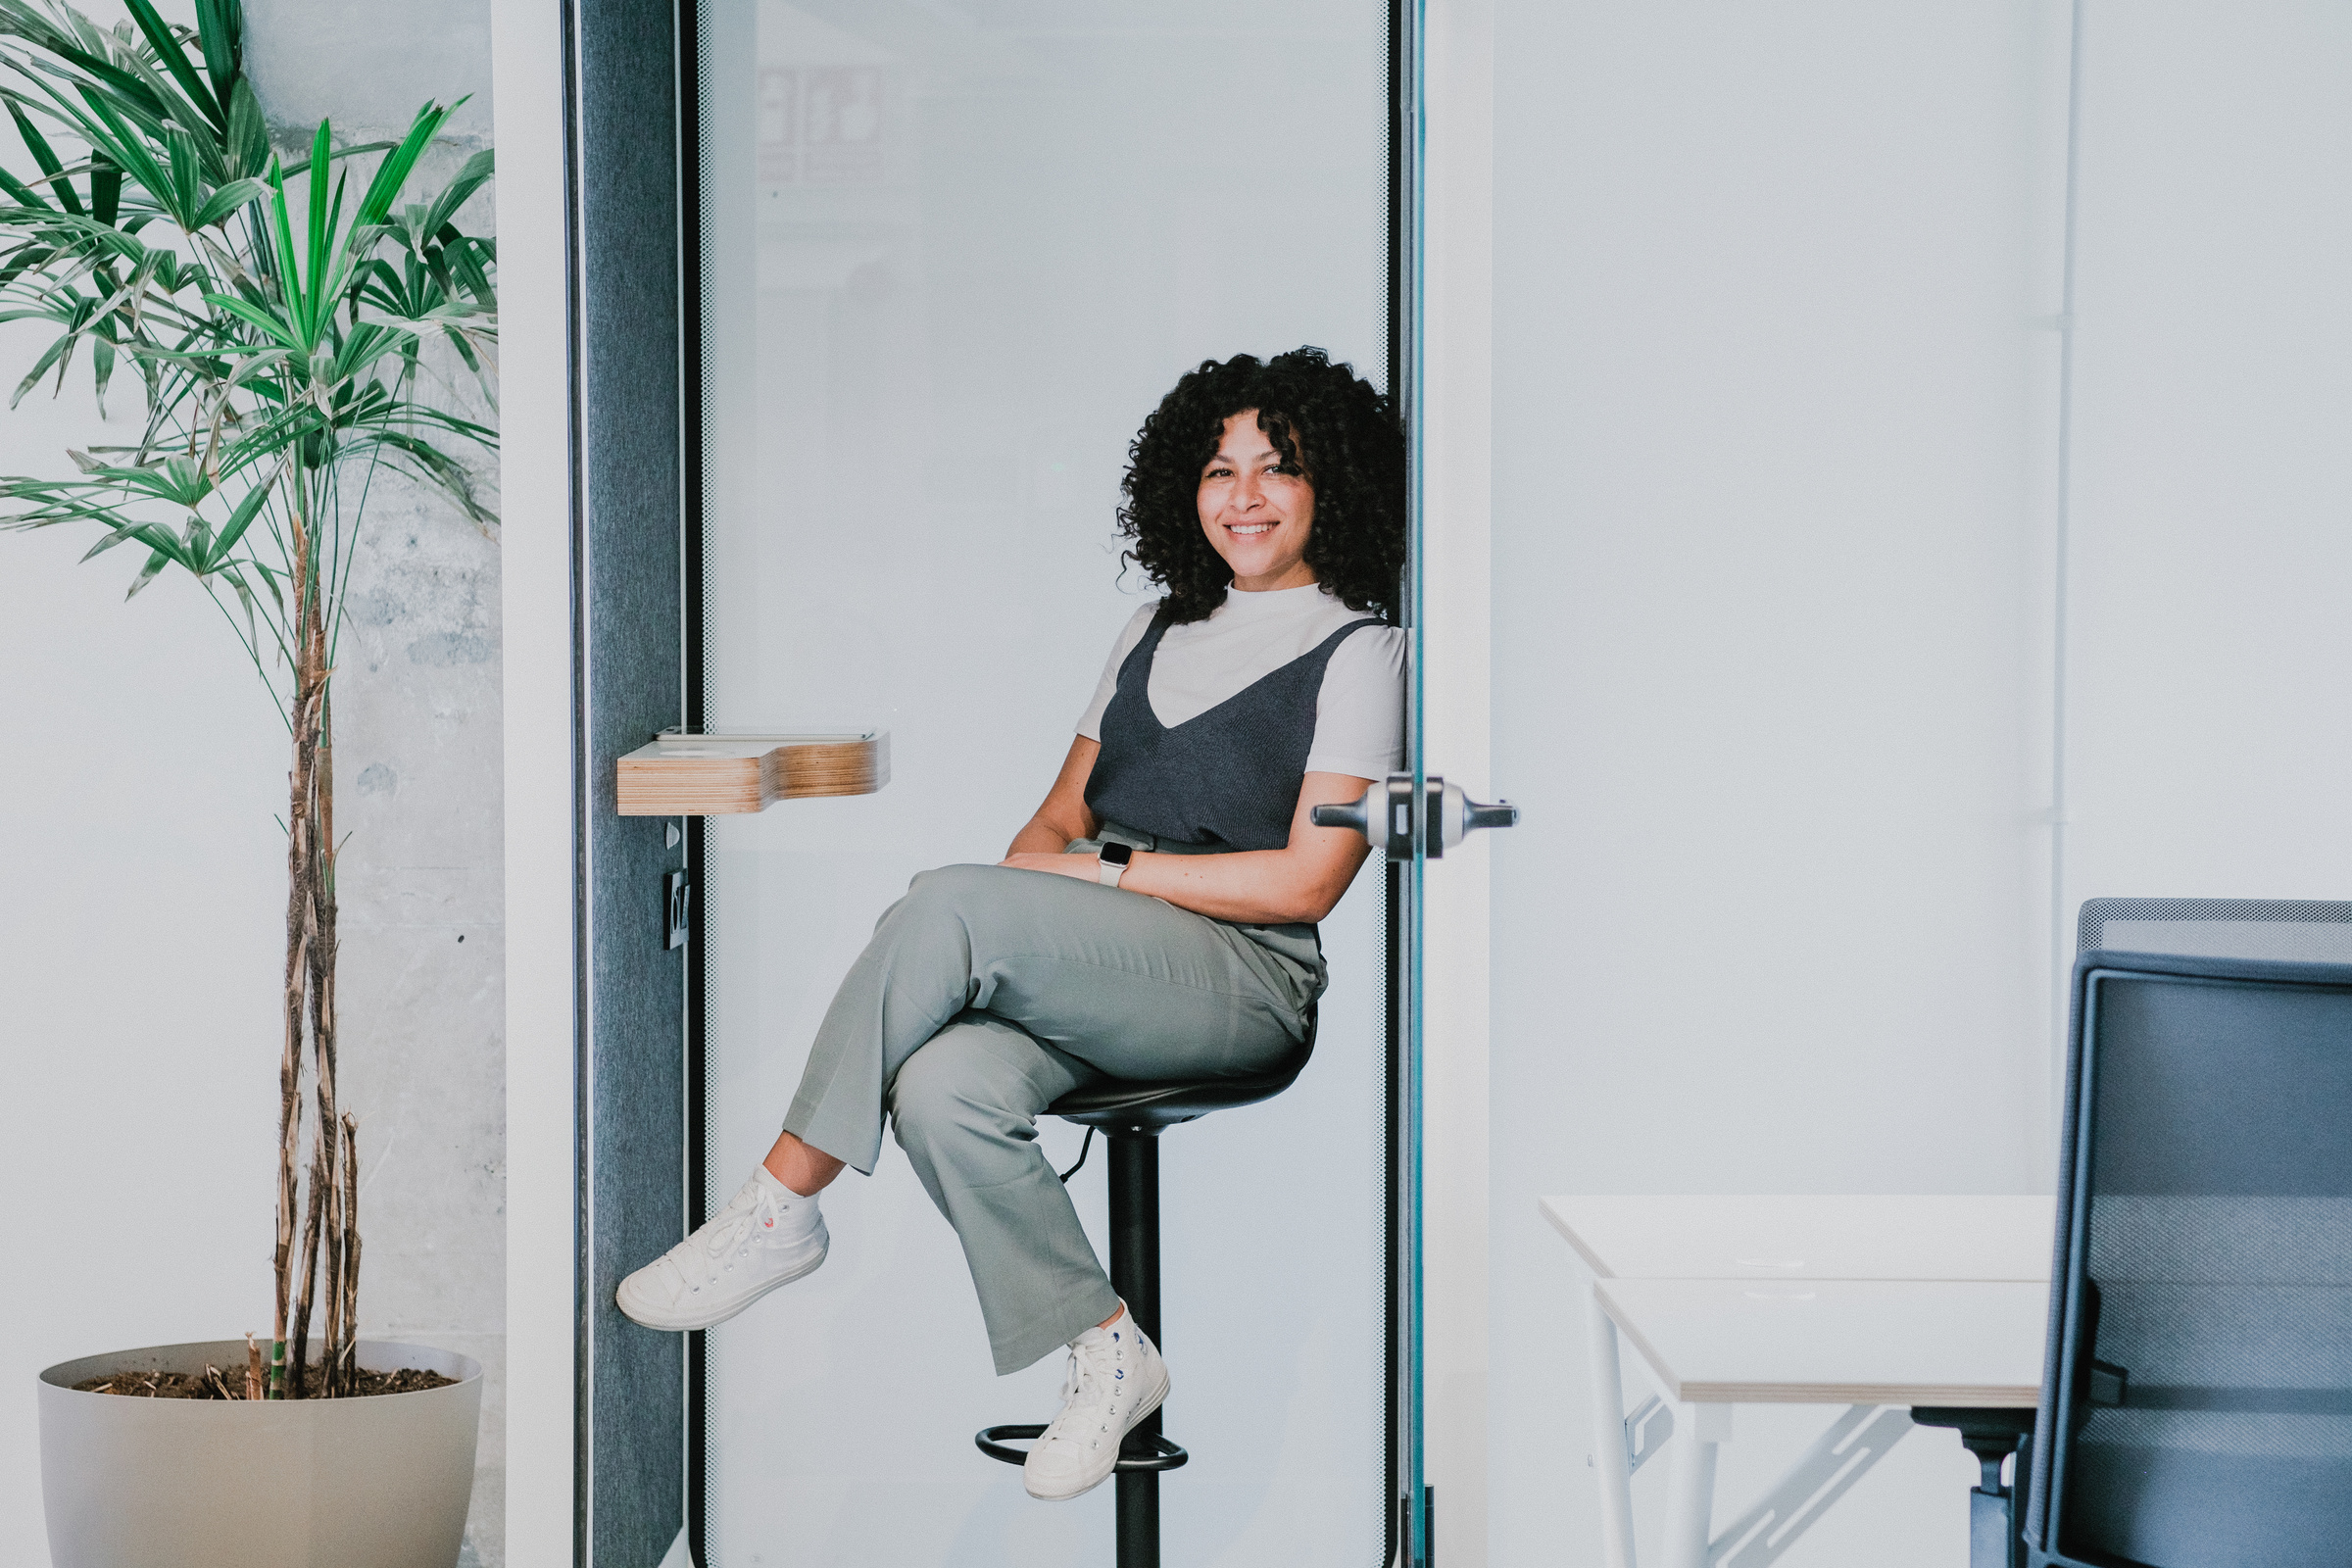 Cool Corporate Portrait of Woman in an Office